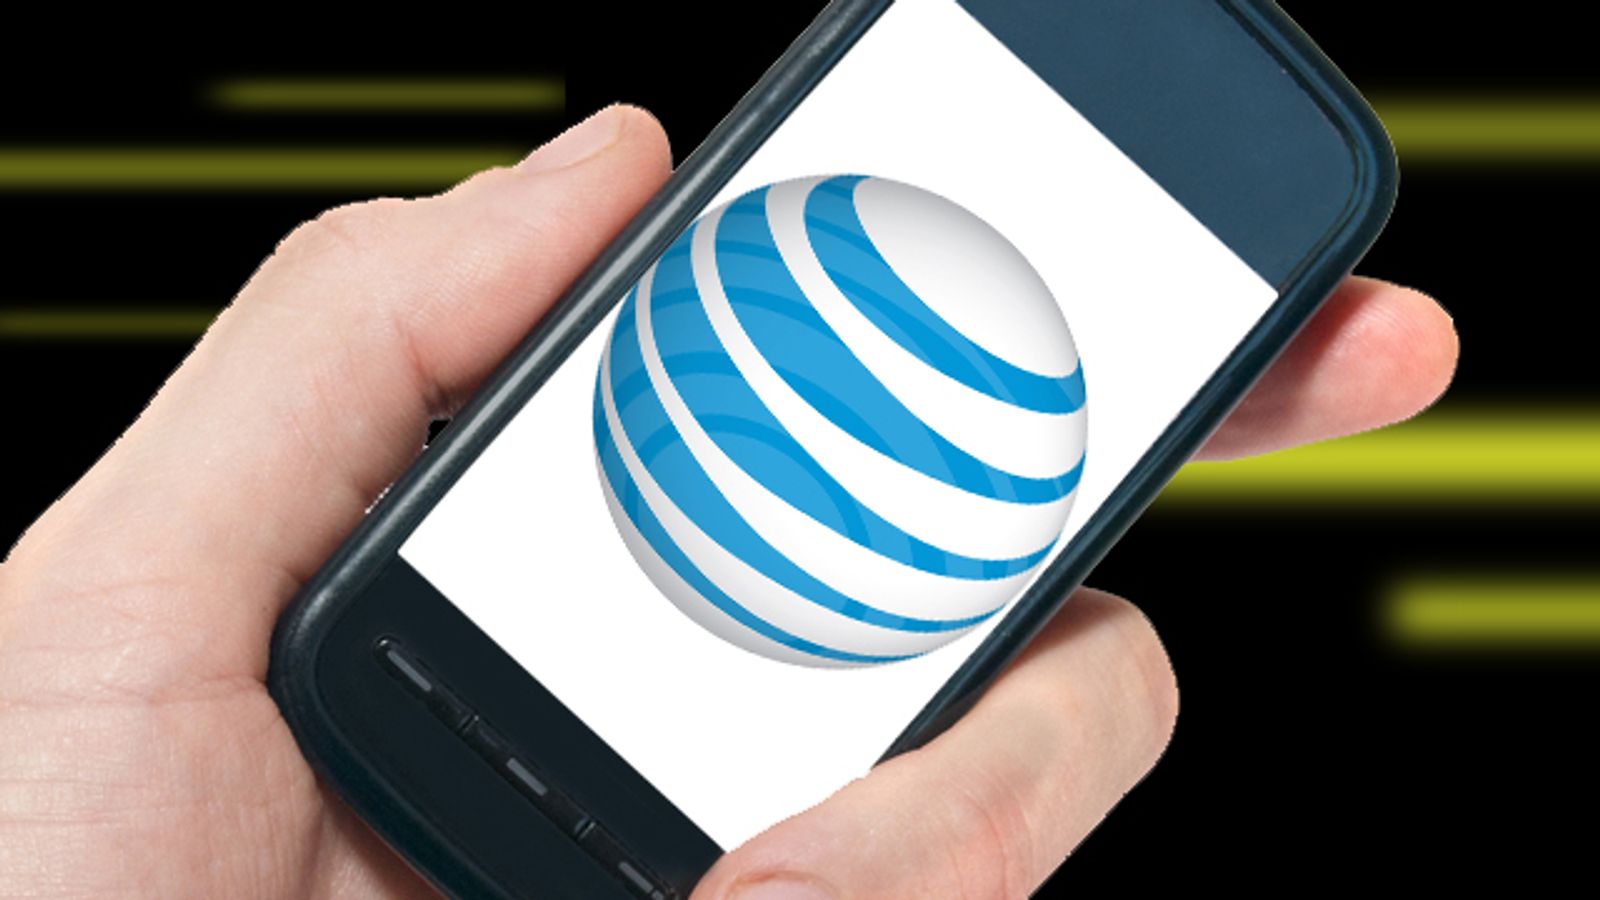 PCMag: AT&T Wins Mobile Network Speed Crown